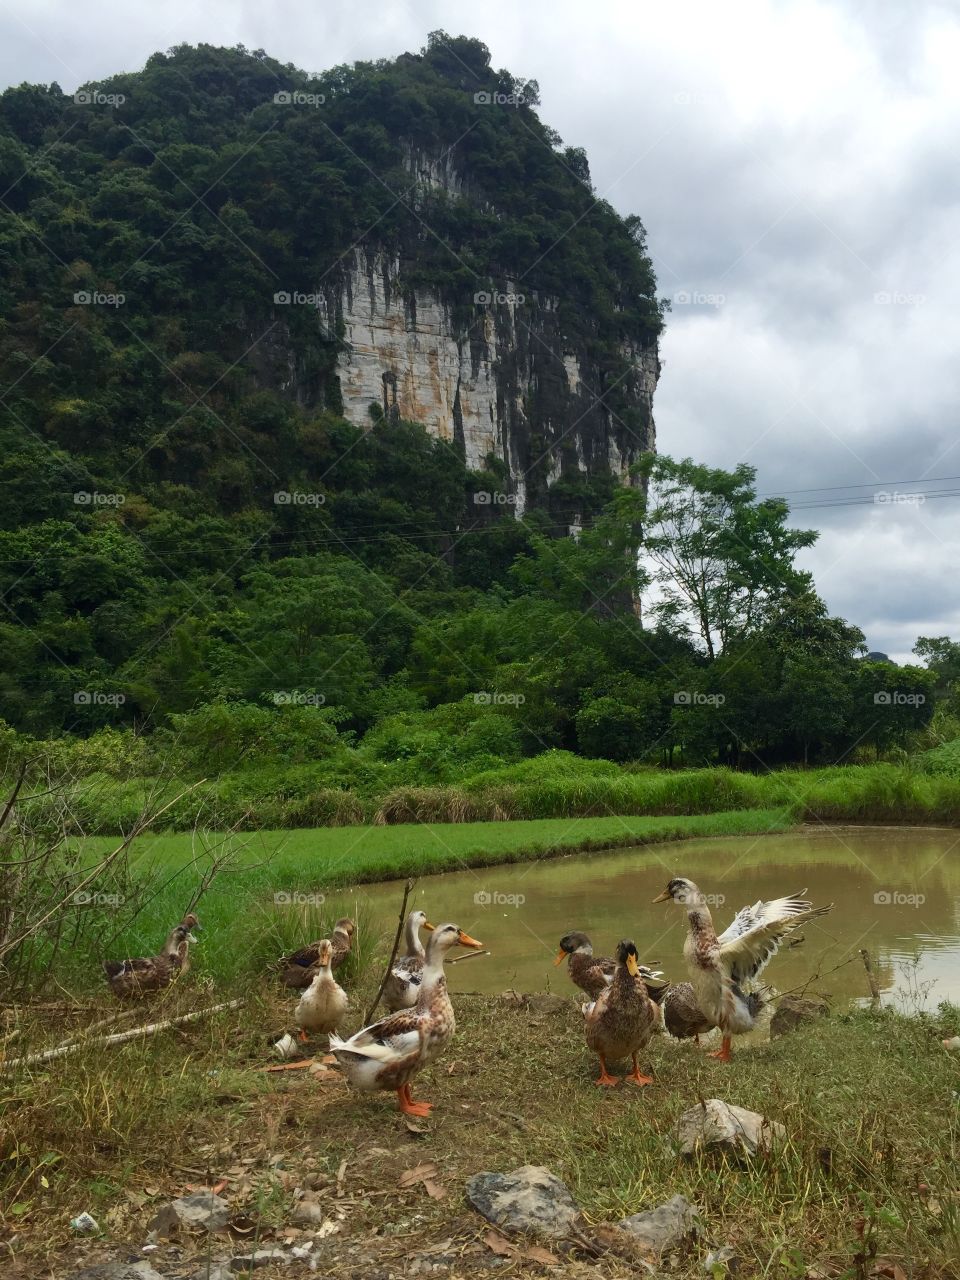 Ducks playing in the water in Guilin, China